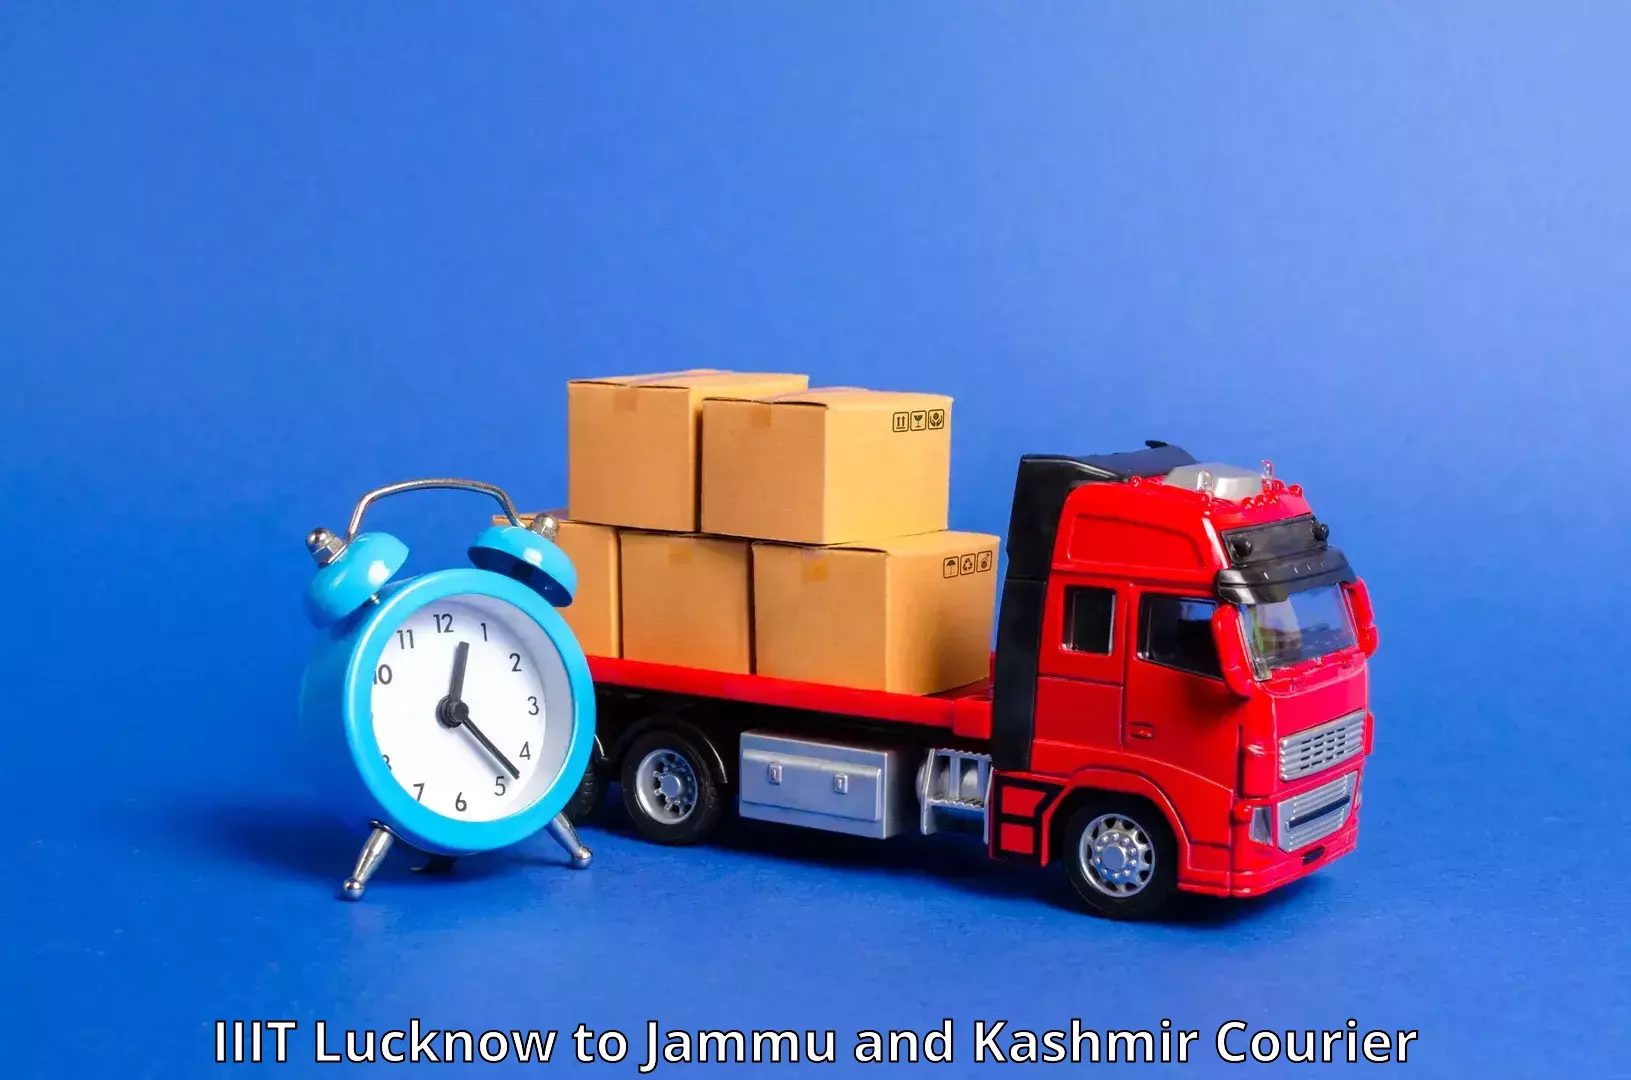 24/7 courier service in IIIT Lucknow to Bohri